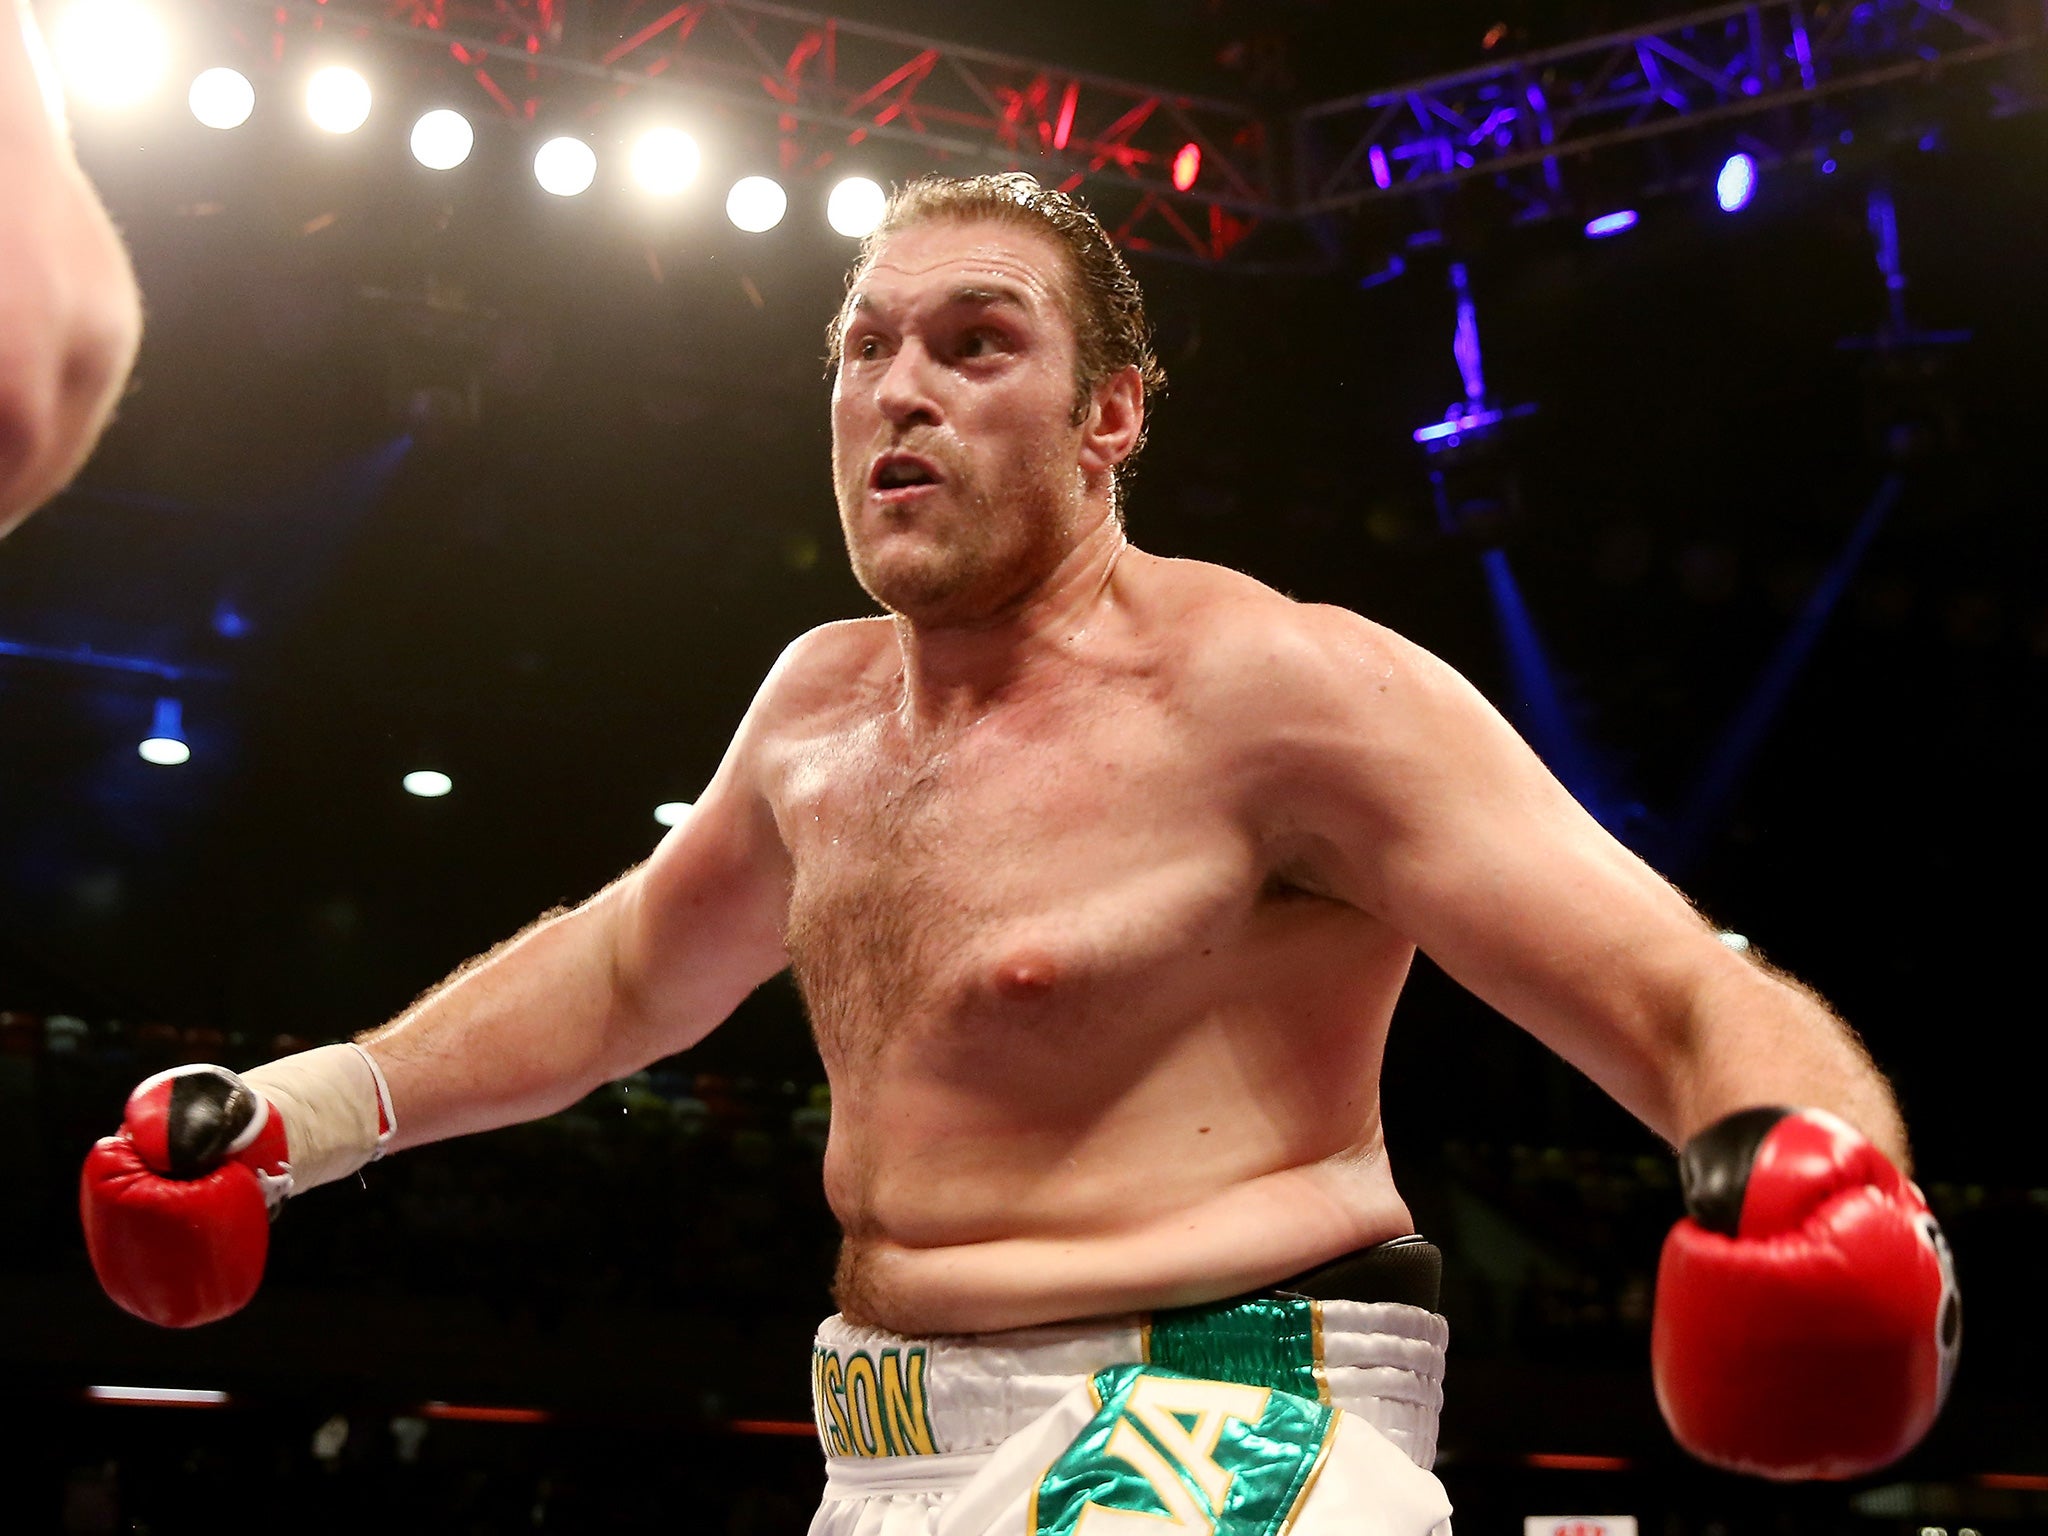 Tyson Fury is mandated to fight Klitschko next as No 1 contender for the WBO title